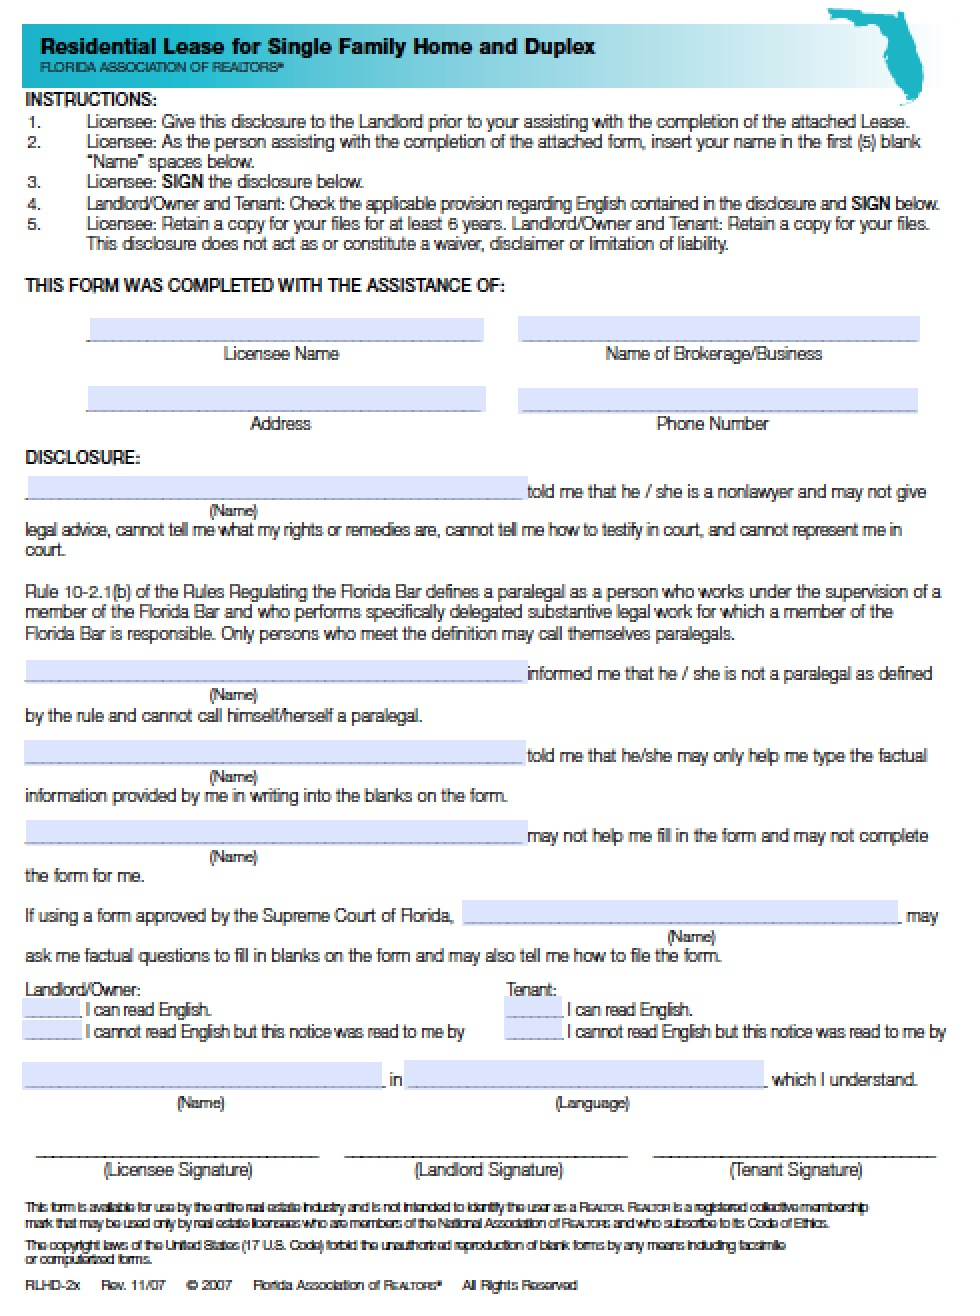 Mobile Home Lease Agreement Download Florida Rental Lease Agreement Forms And Templates Pdf